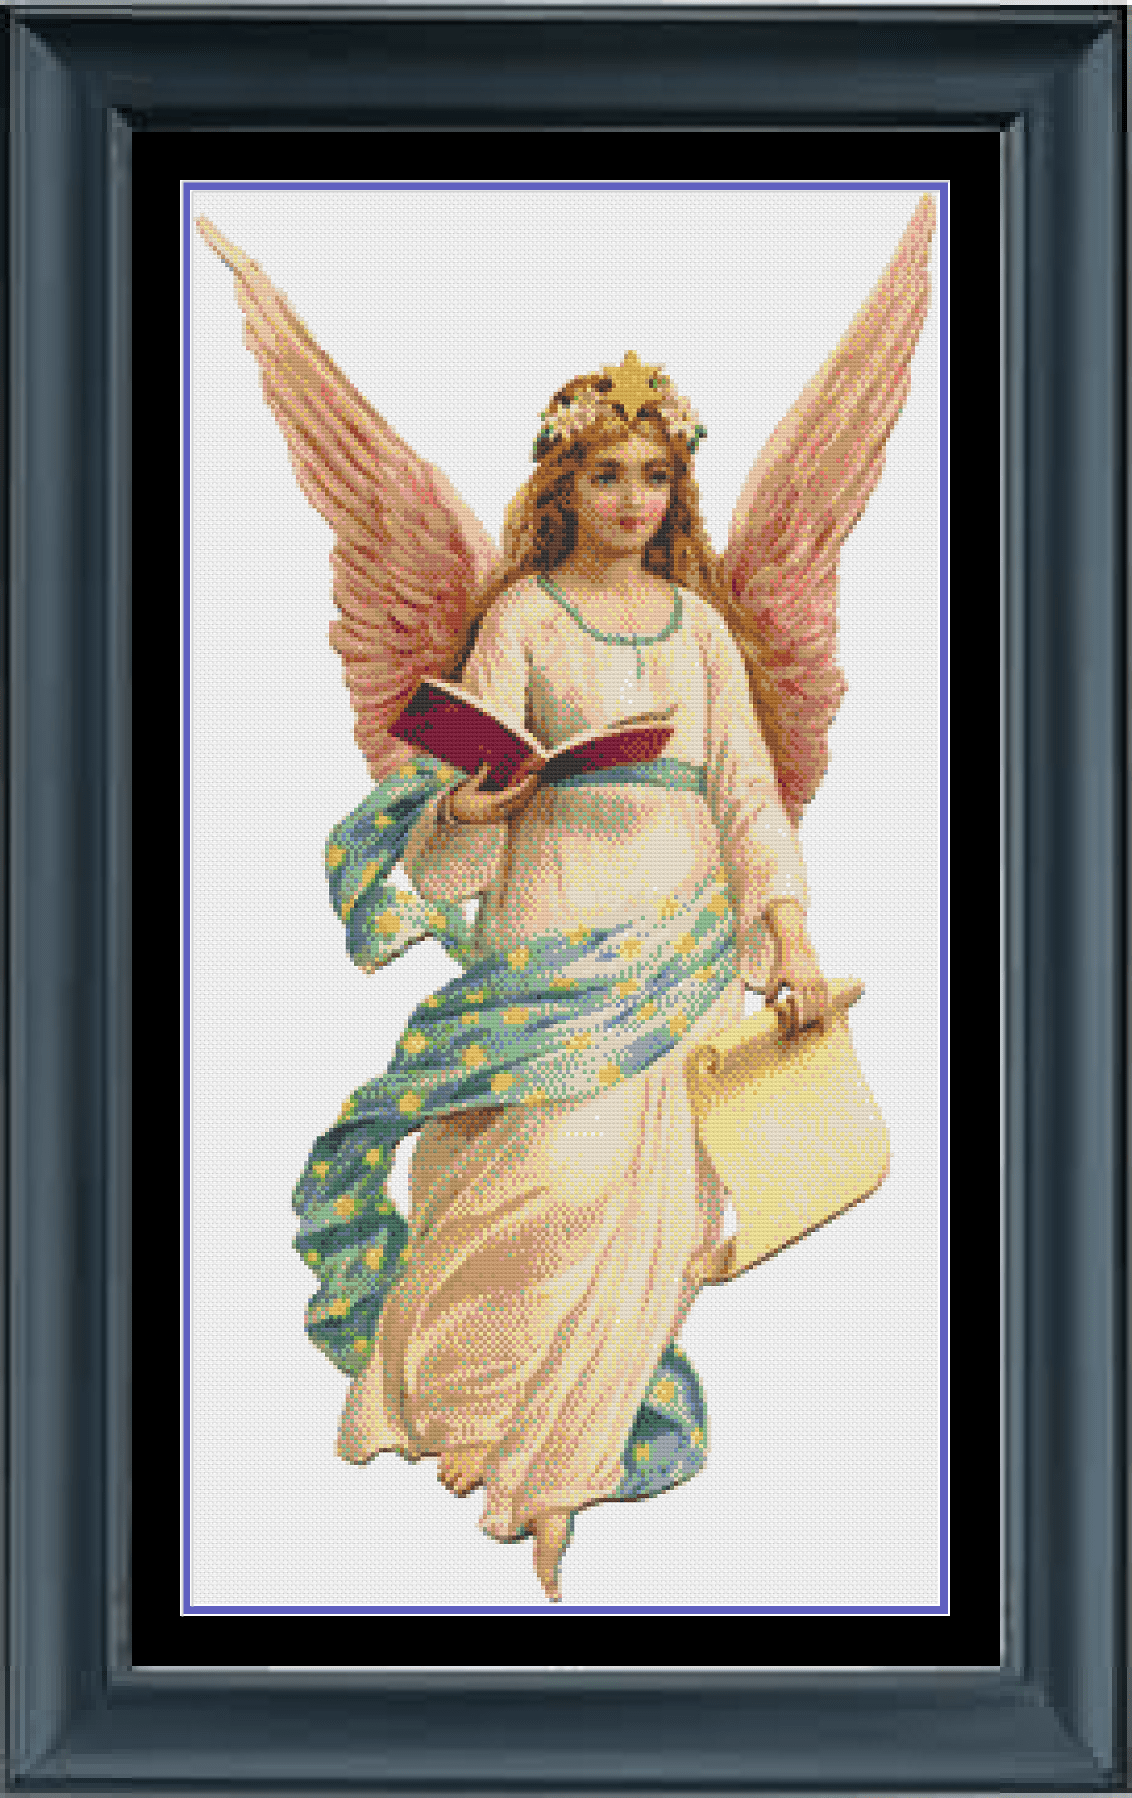 Stitching Jules Design Cross Stitch Pattern Angel Christian Religious Cross Stitch Embroidery Needlepoint Instant PDF Download Pattern Keeper Ready